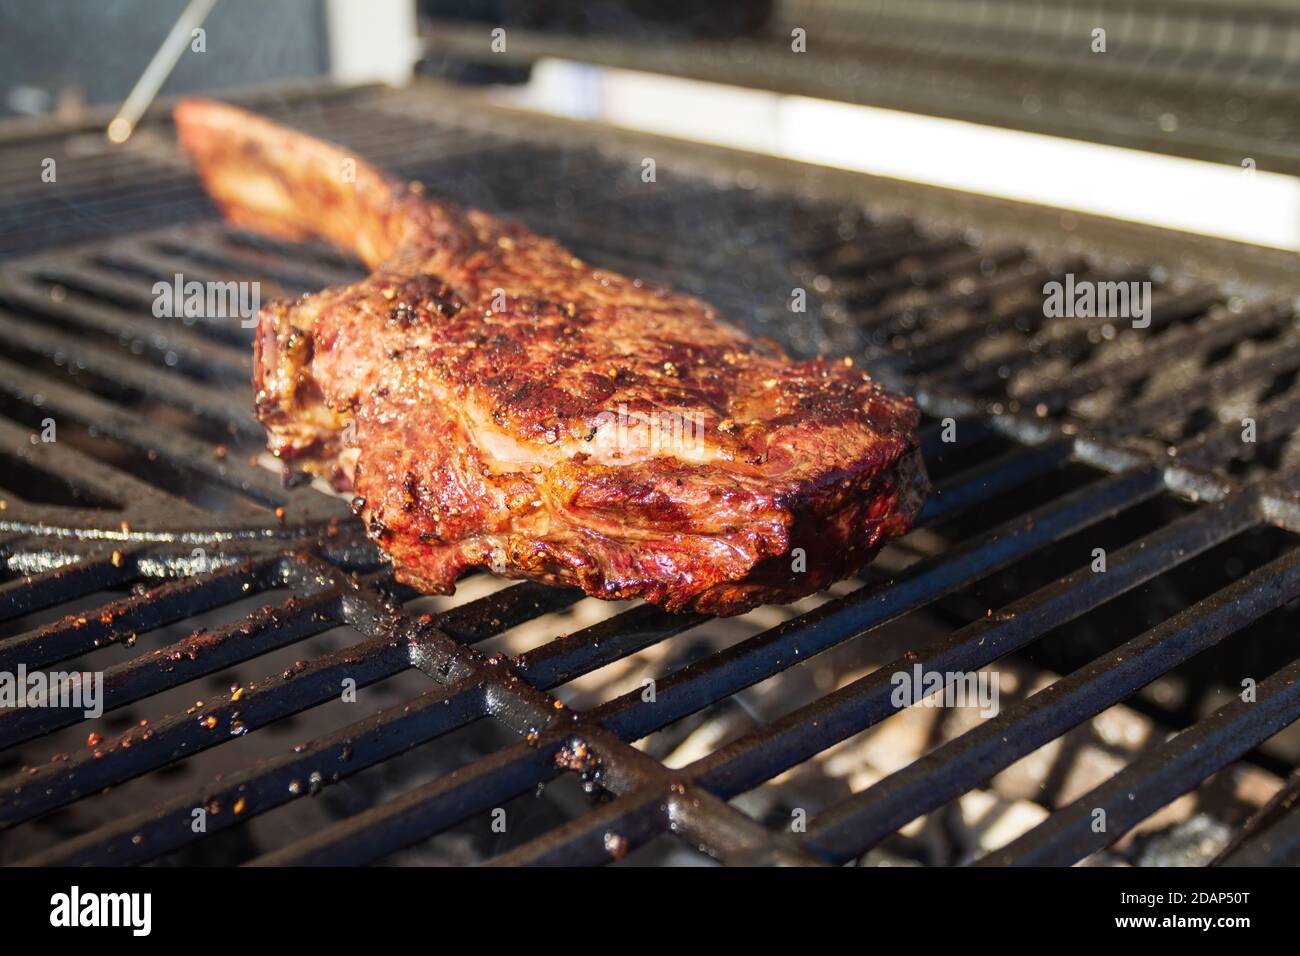 Dry Aged Barbecue Tomahawk Steak on grill Stock Photo